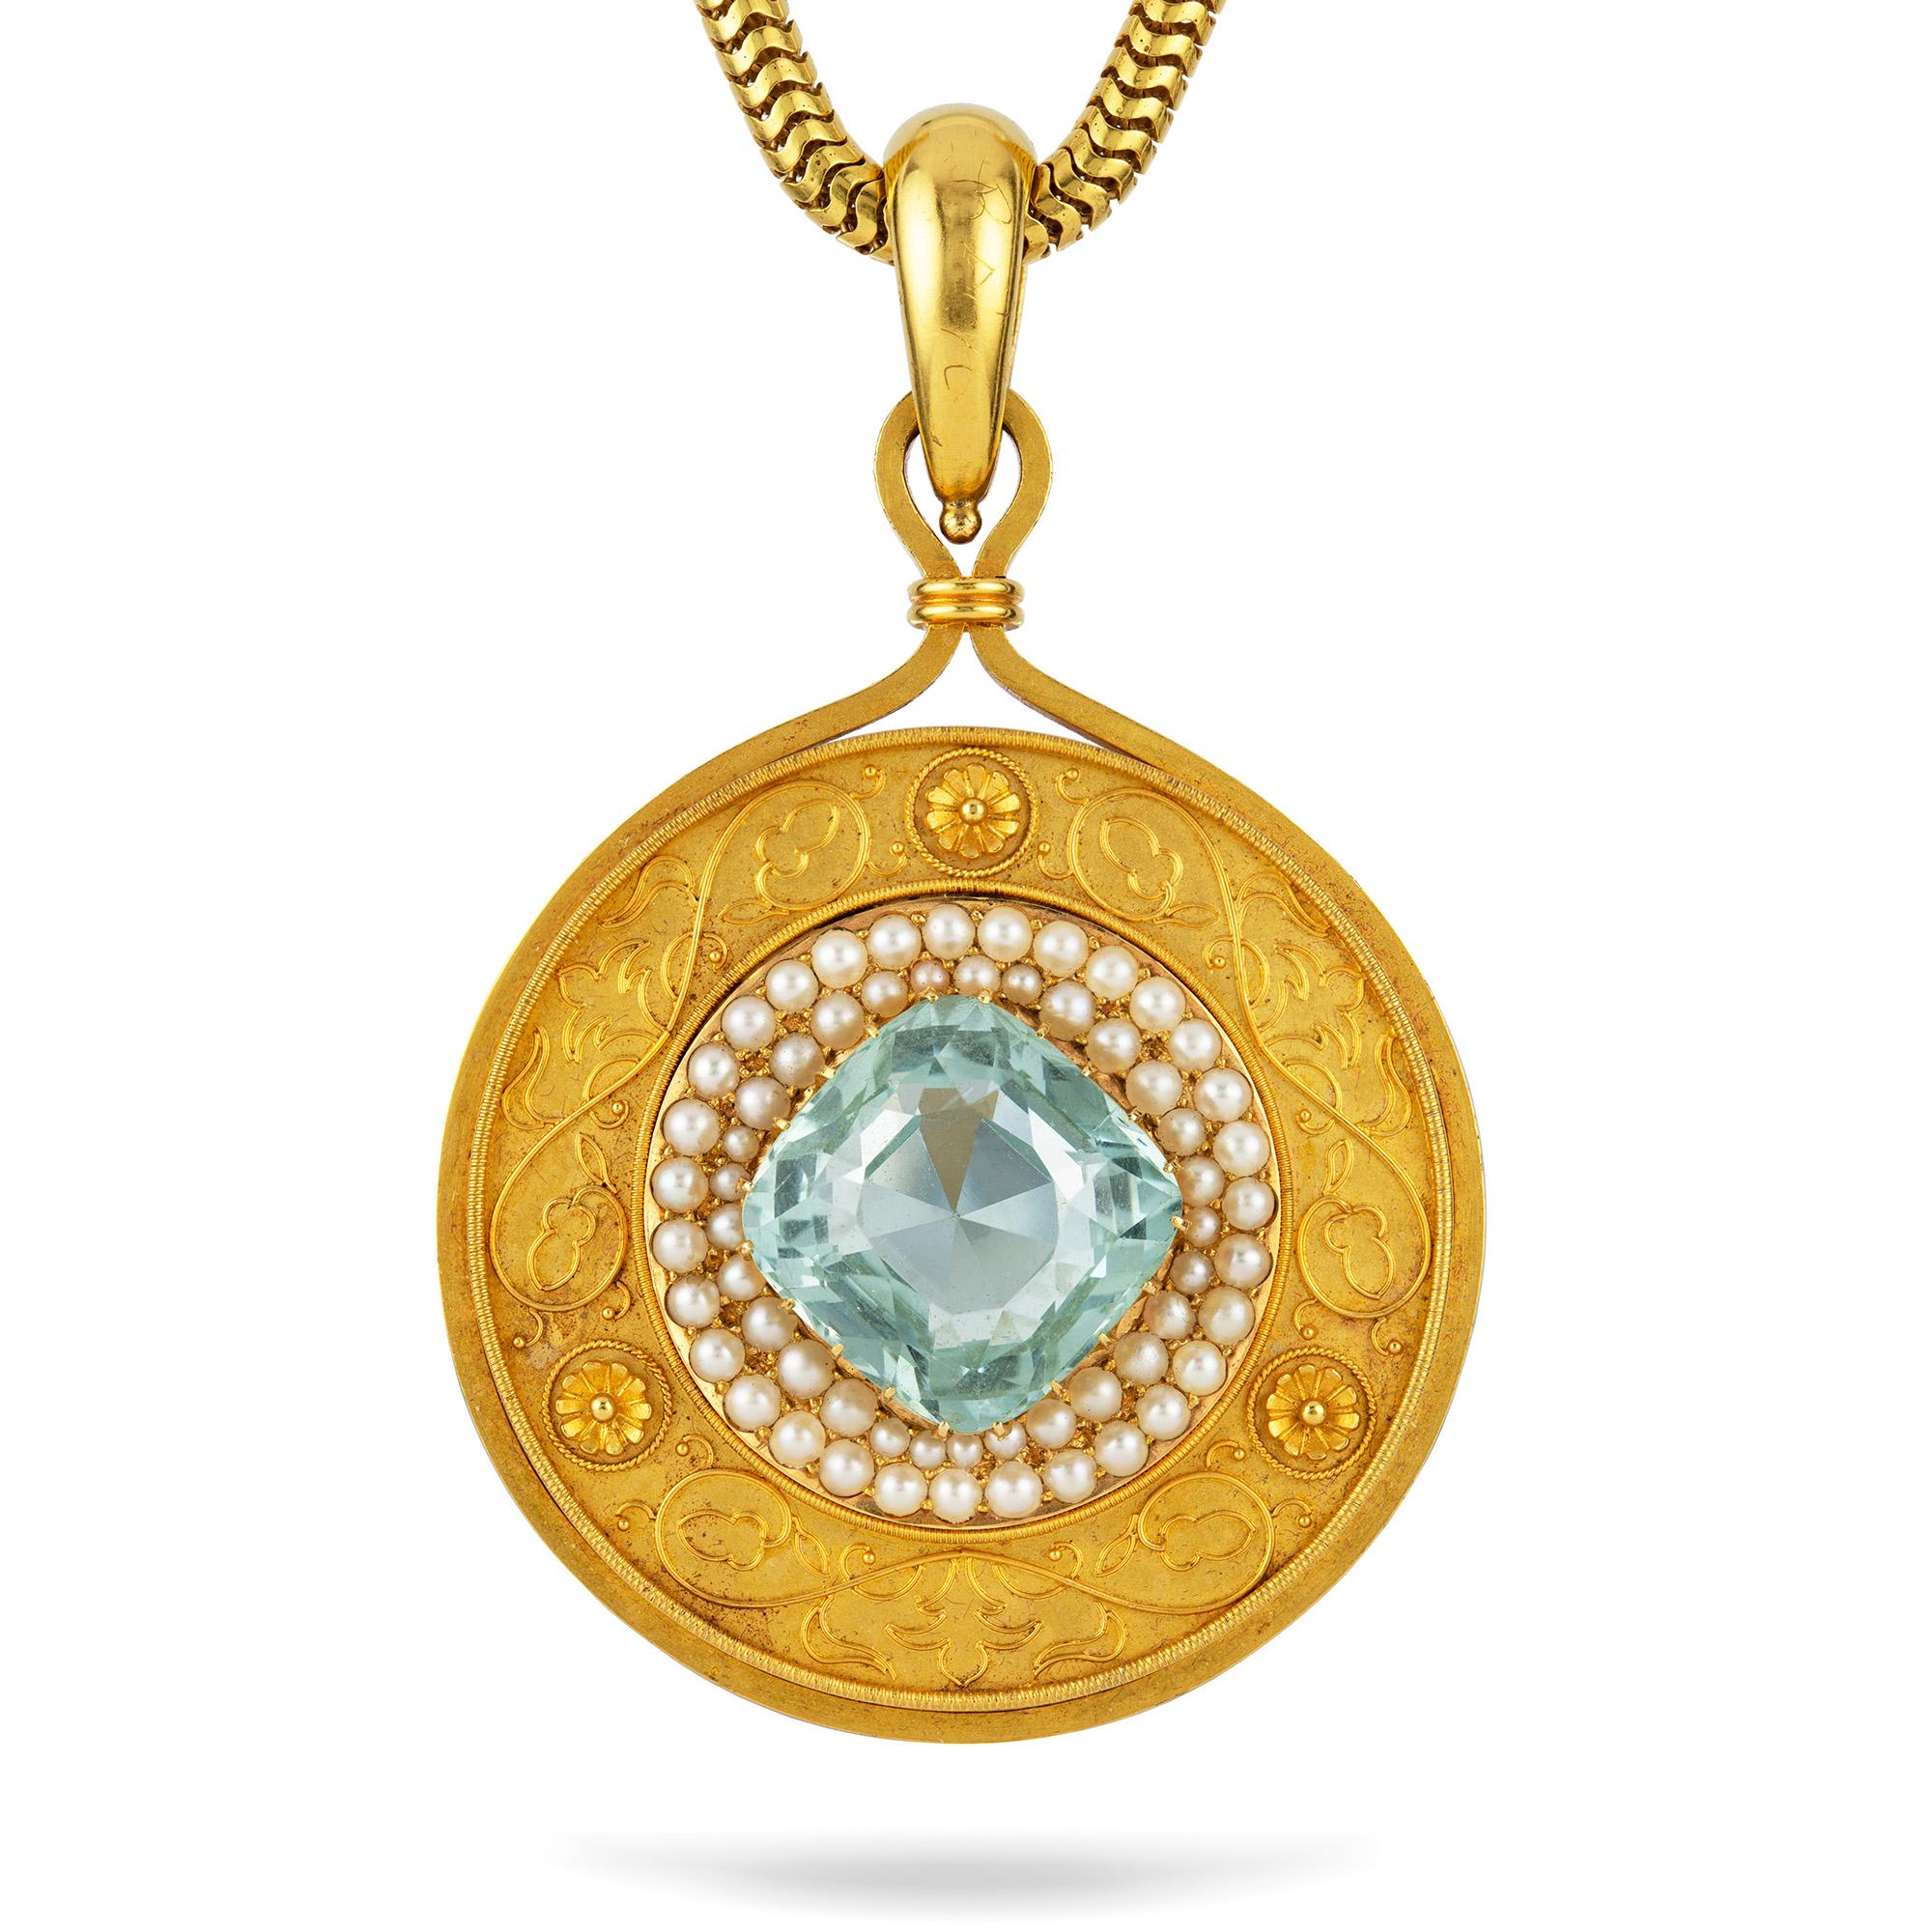 Cushion Cut Victorian Aquamarine, Pearl and Gold Pendant-Necklace